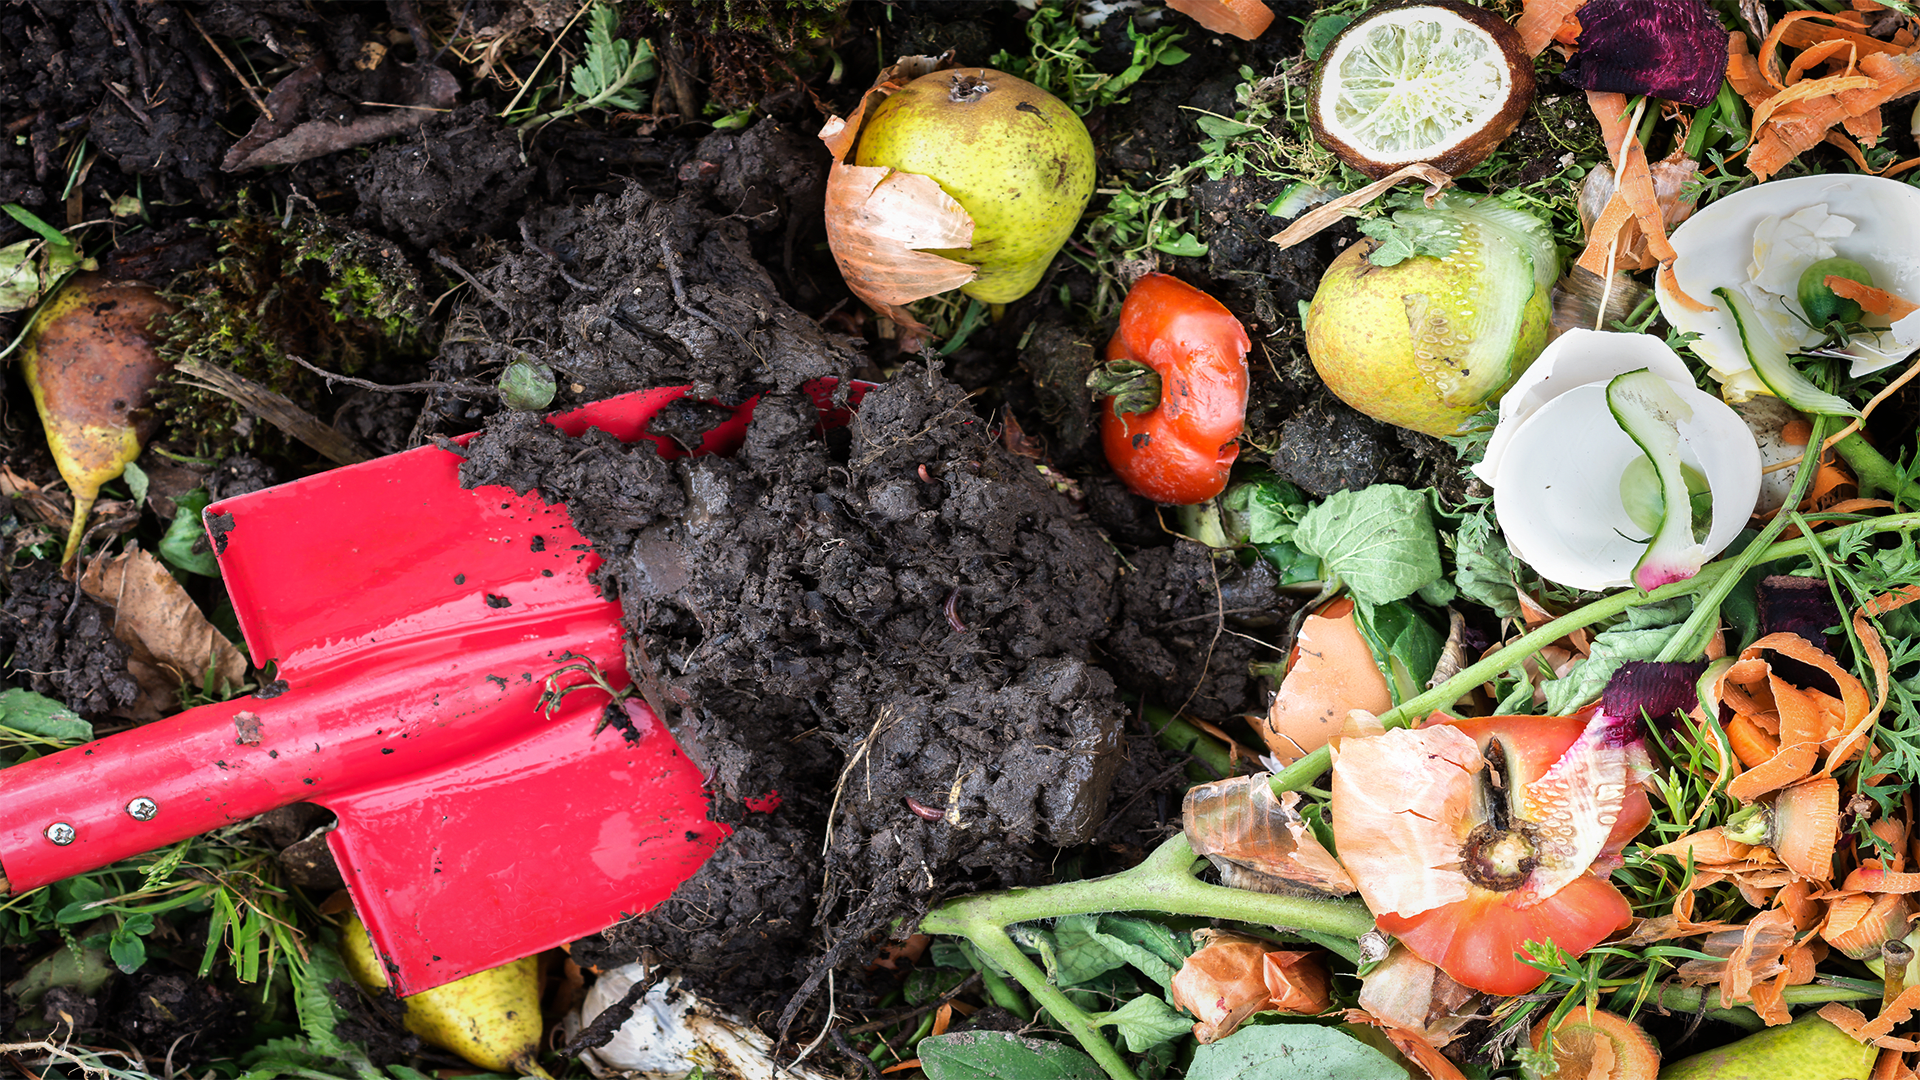 How does composting work?